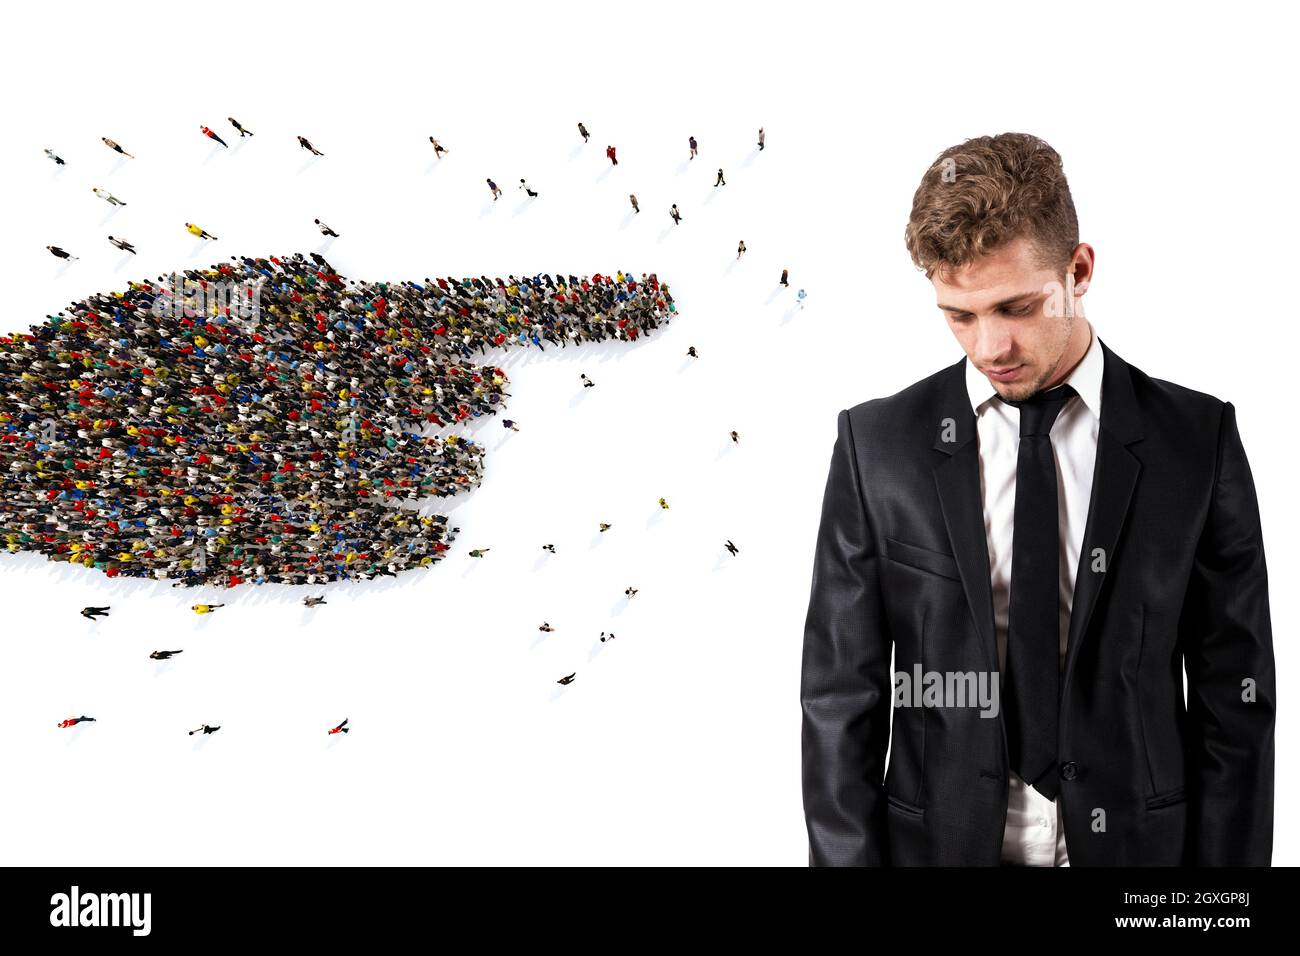 Multitude of people united to discredit a man. 3D Rendering Stock Photo